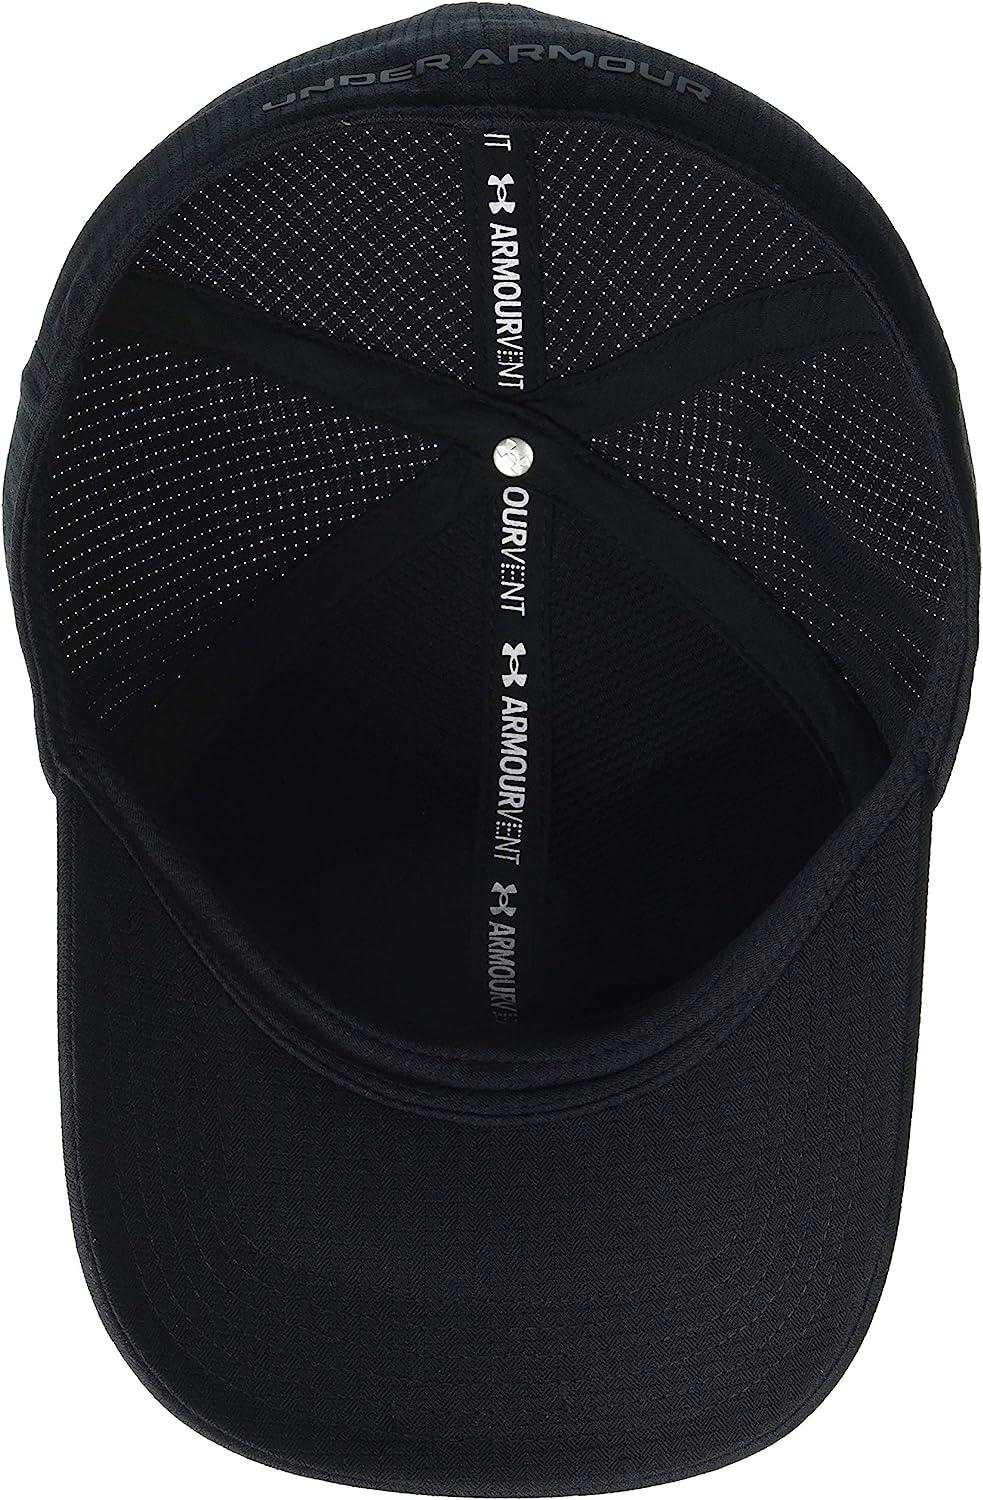 Under Armour Men's Iso-chill ArmourVent Fitted Baseball Cap Black